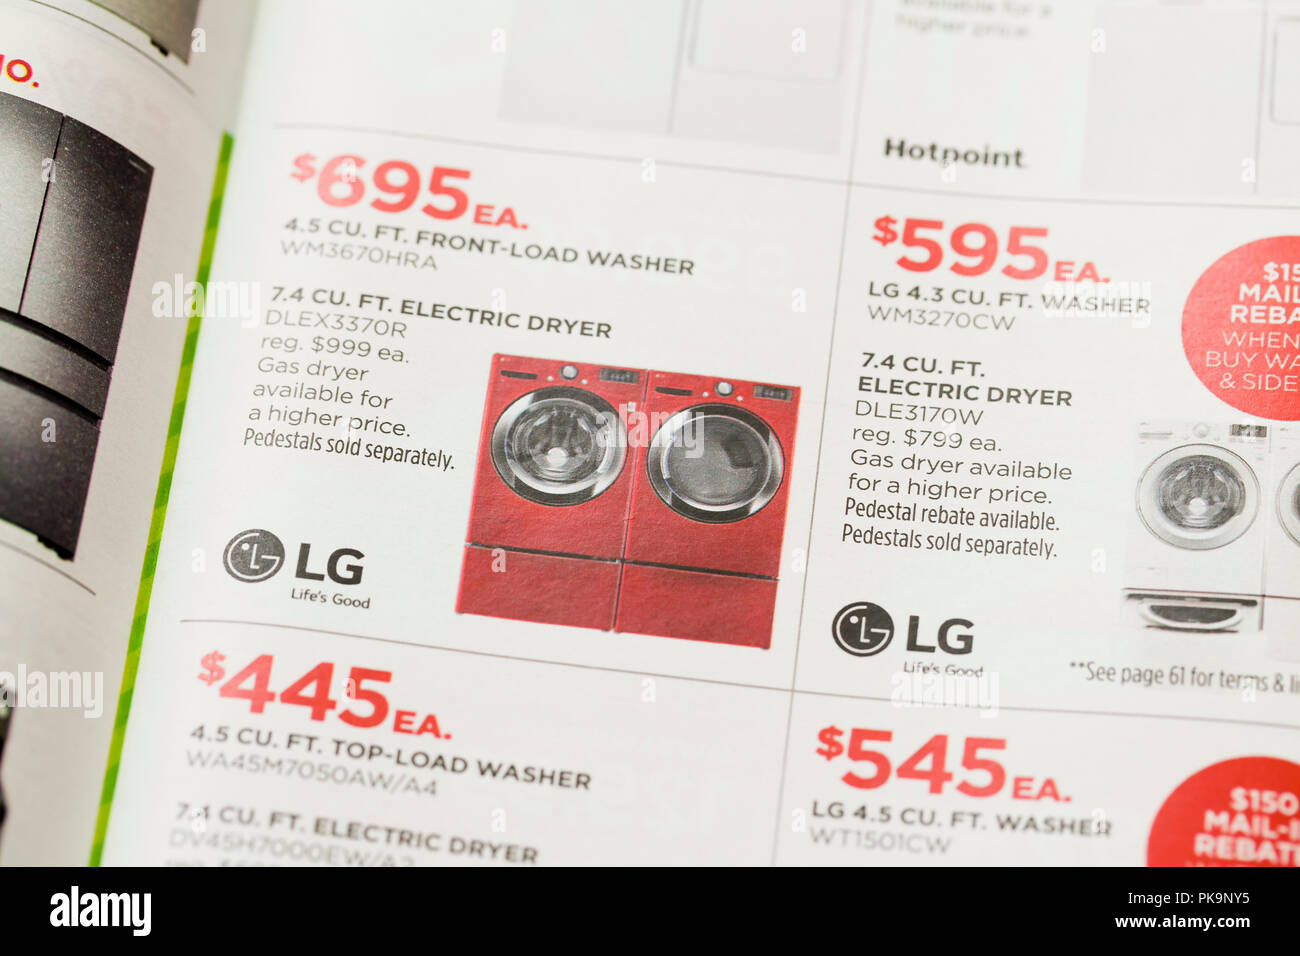 Weekly mailer ad for clothes washer and drier (home appliances) - USA Stock Photo